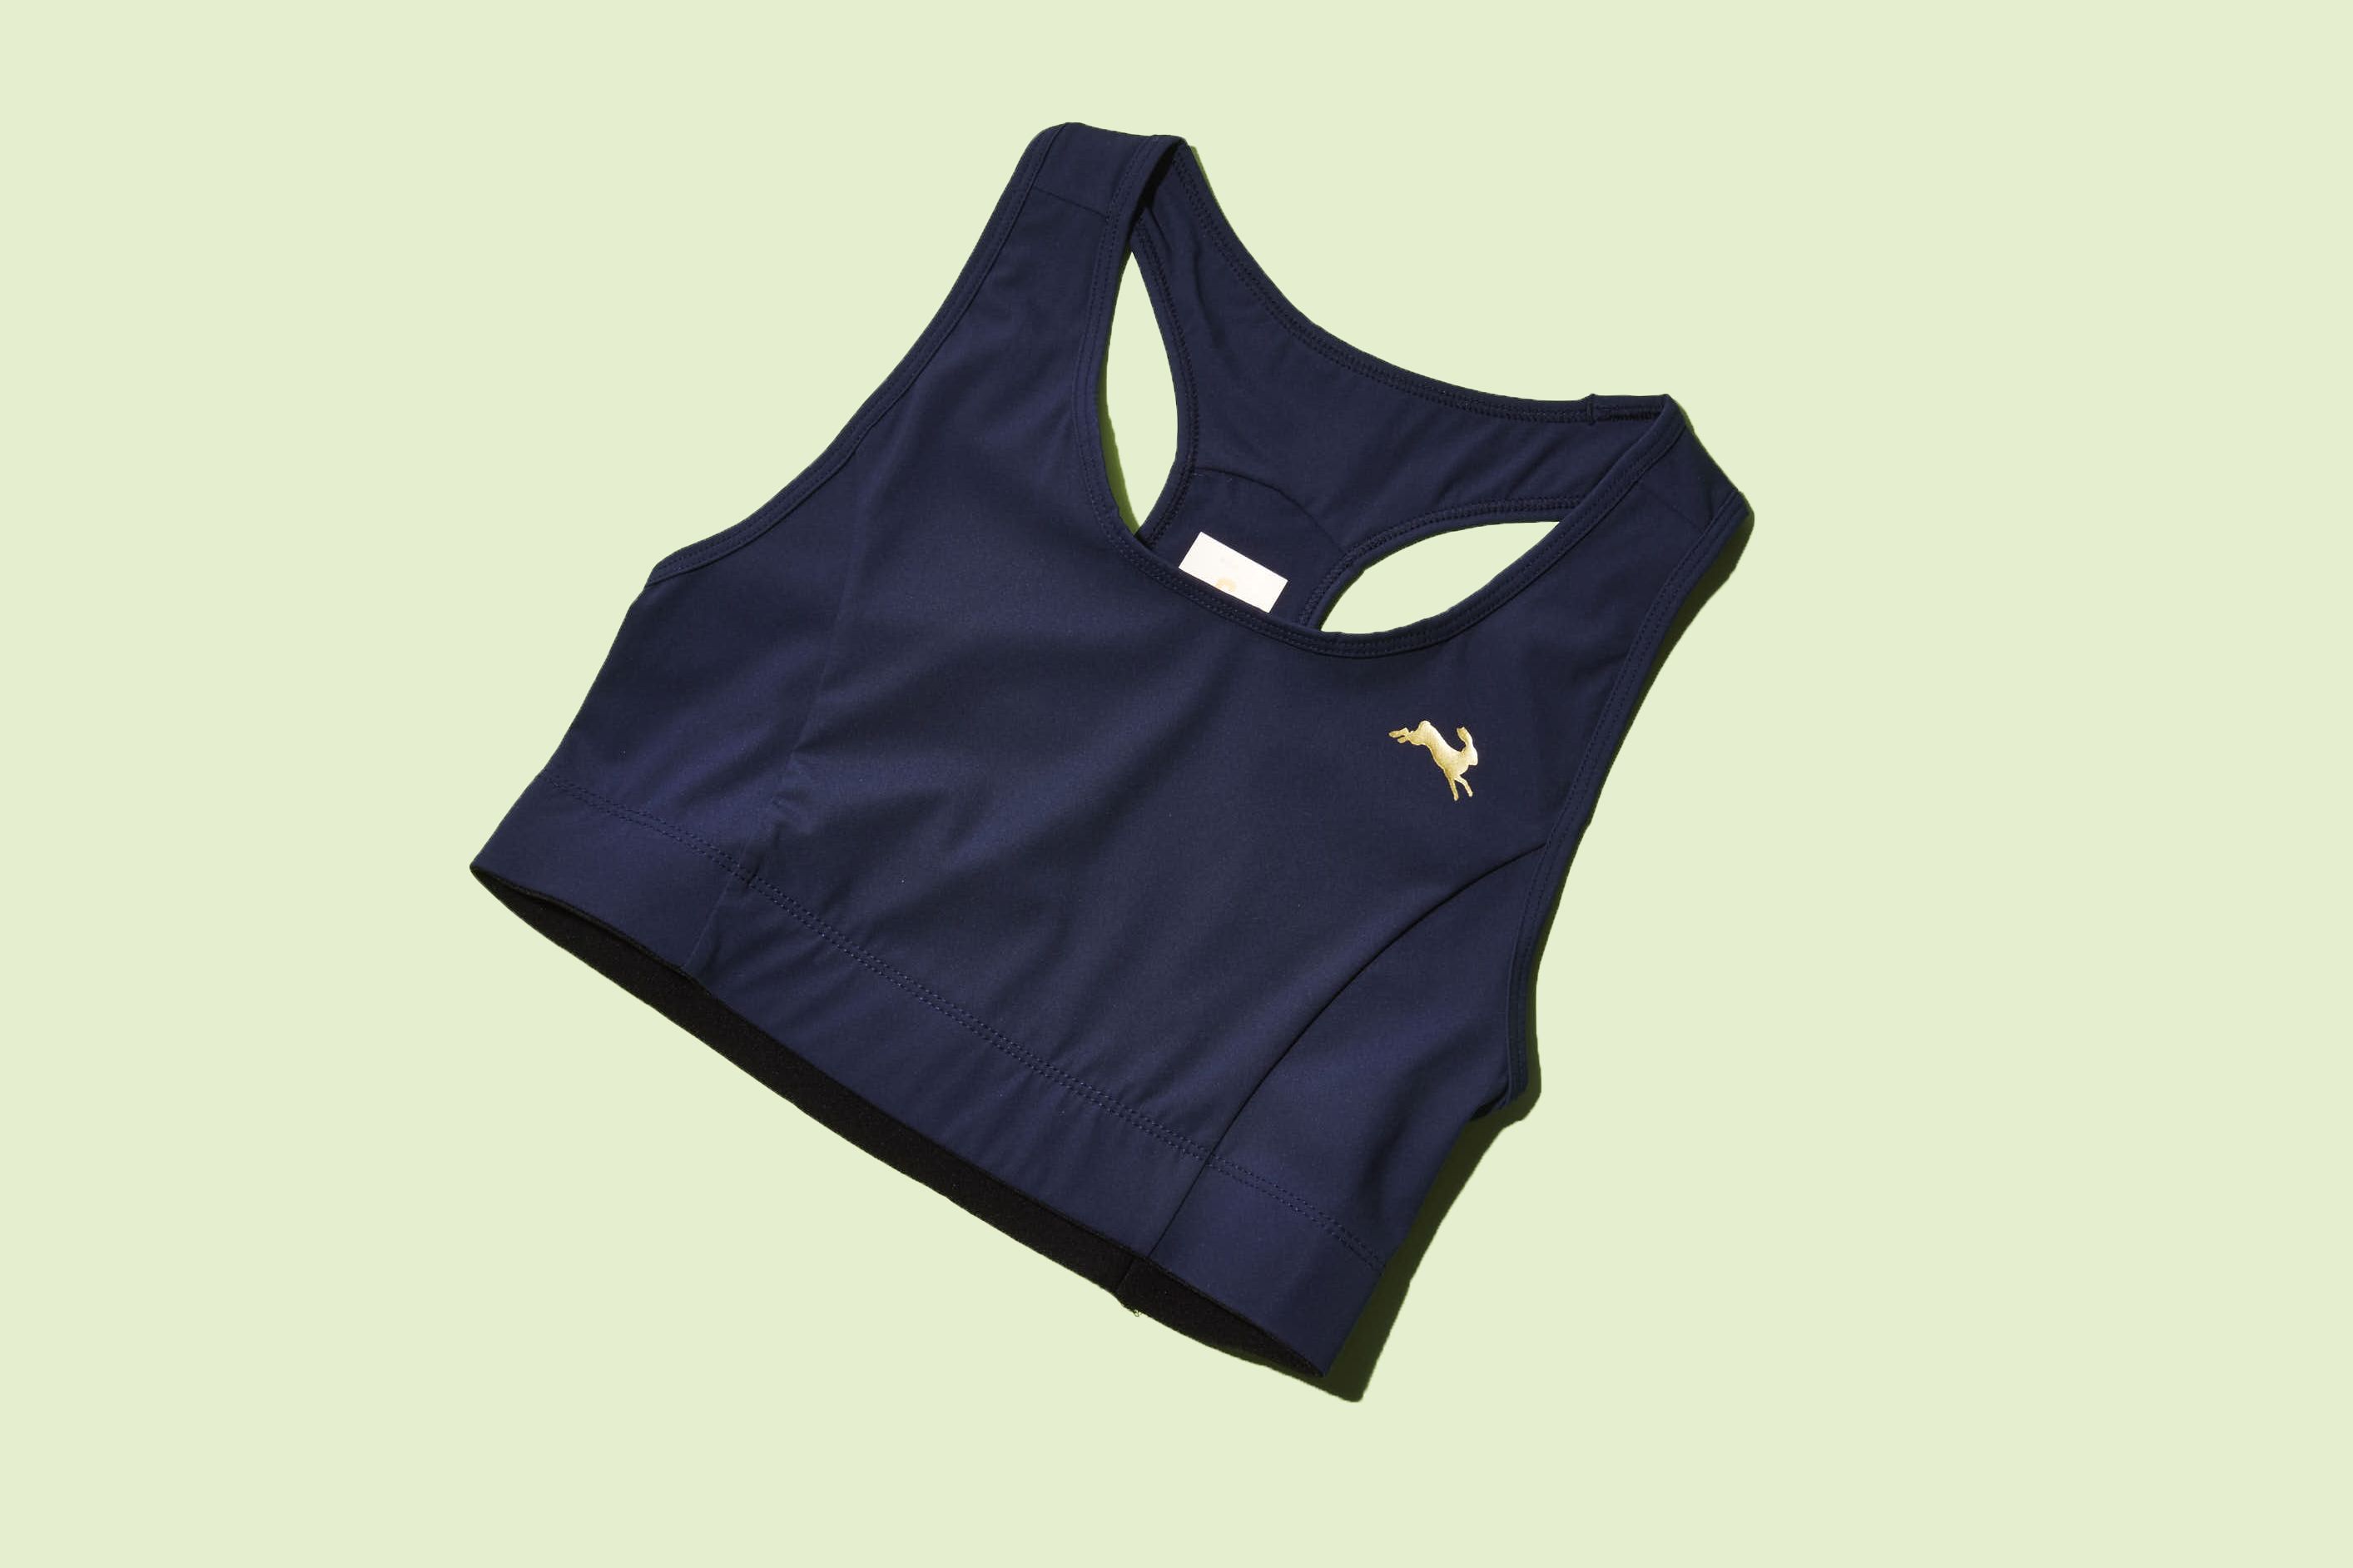 Why the Sports Bra Is the Most Important Piece of Running Gear Ever Invented